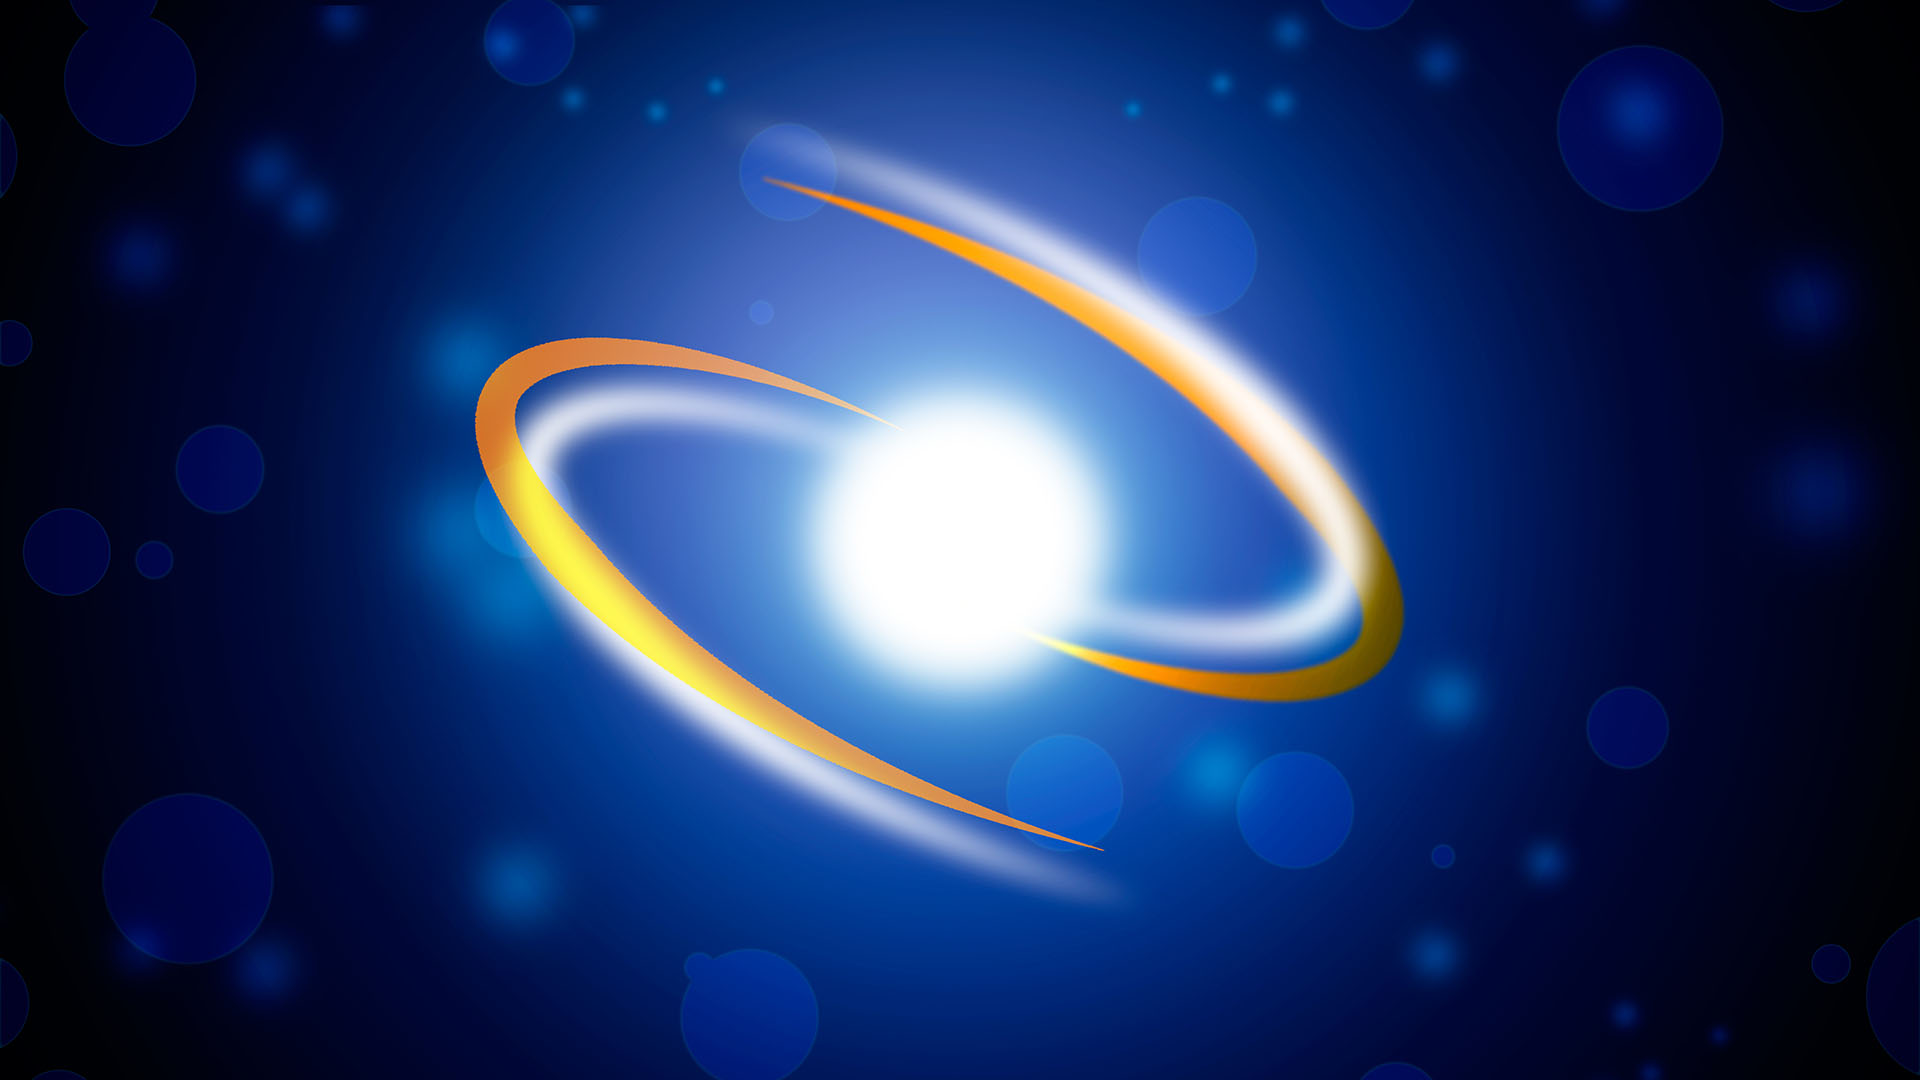 Electron with curved line extensions indicating a circular motion positioned on gradient dark blue to black background